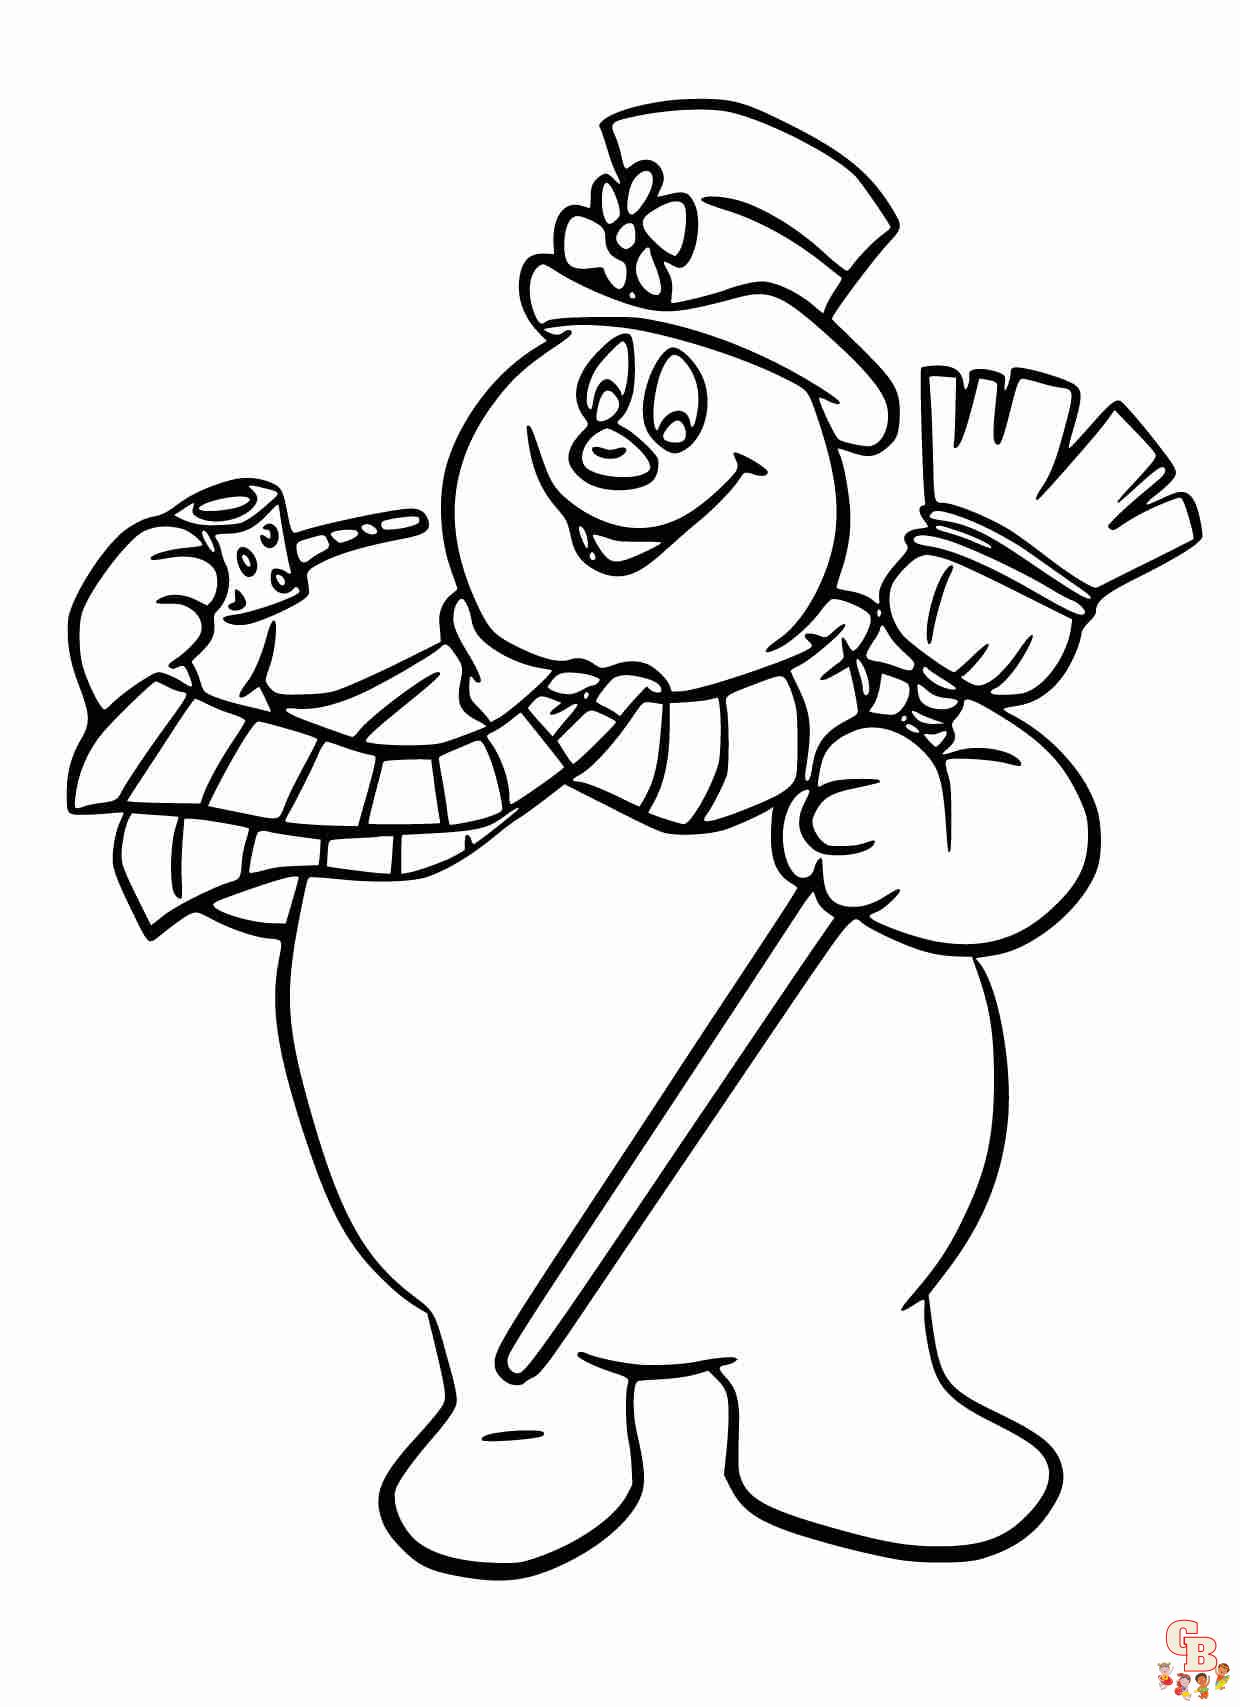 Snowman coloring pages printable and free for kids